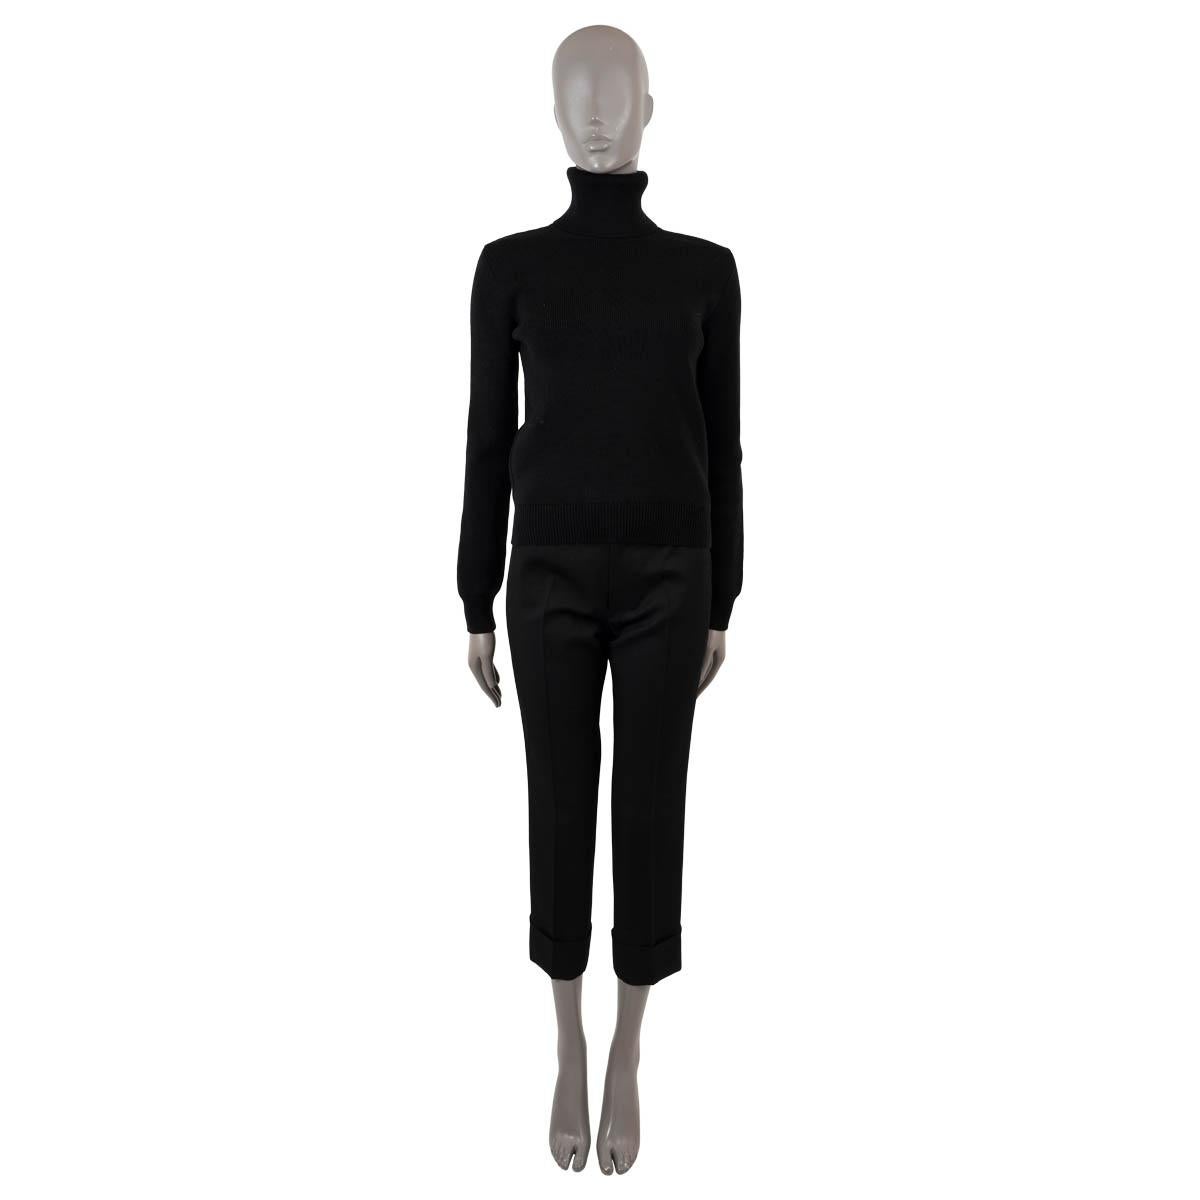 100% authentic Saint Laurent turtleneck sweater in black rib-knit wool (100%). Features rib knit cuffs and hem. Unlined. Has been worn and is in excellent condition.

Measurements
Model	537409
Tag Size	M
Size	M
Shoulder Width	39cm (15.2in)
Bust